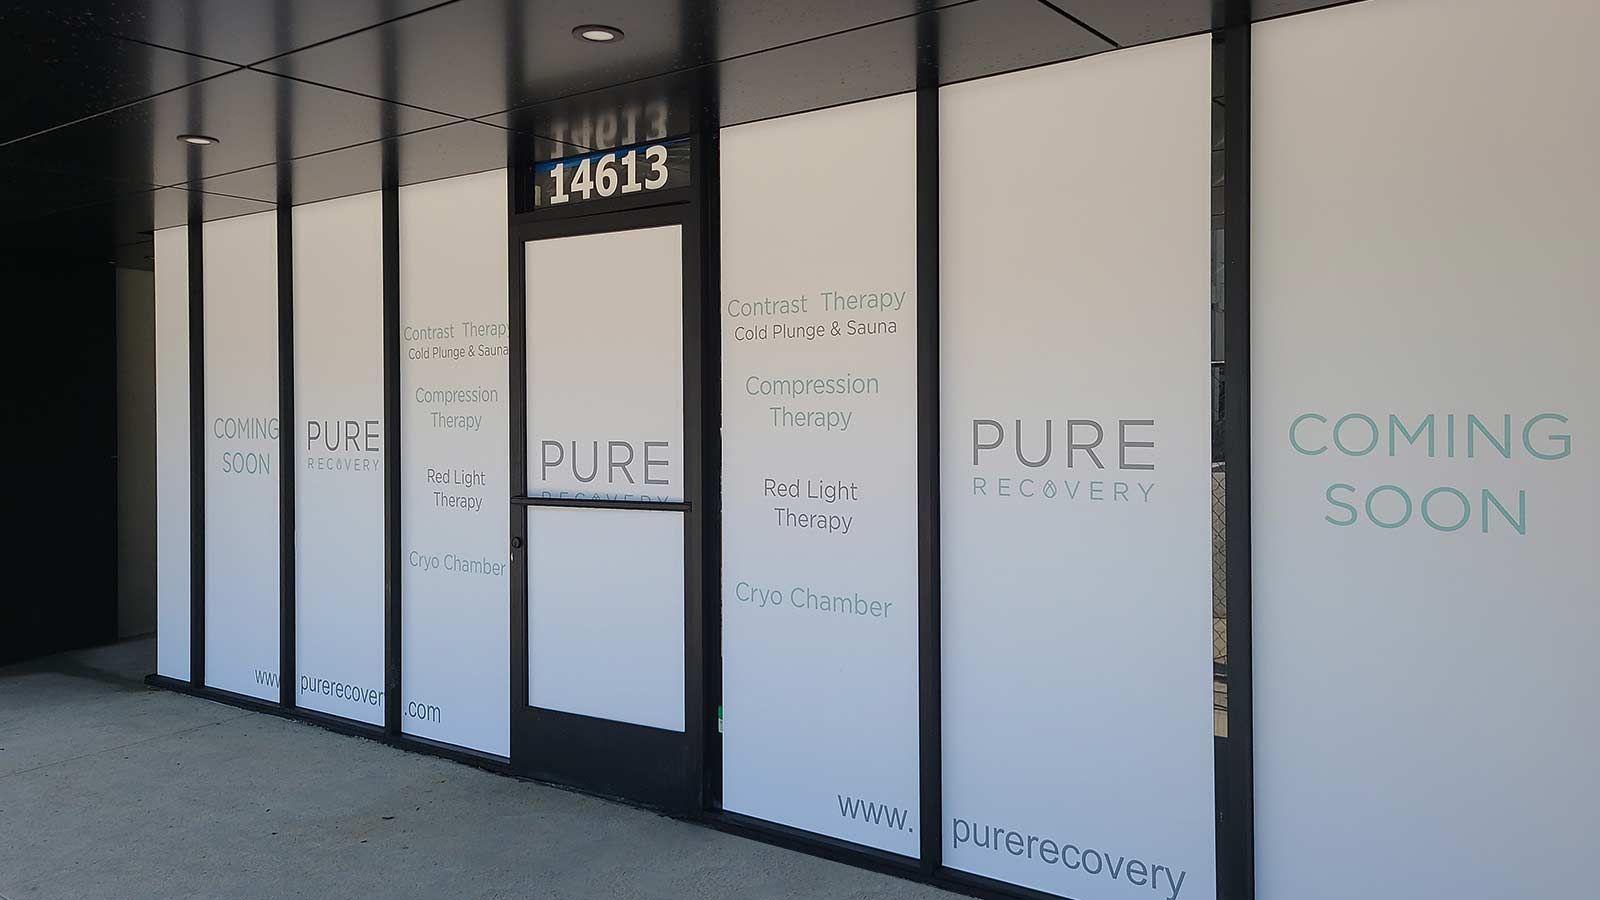 Pure Recovery window decals applied to the storefront